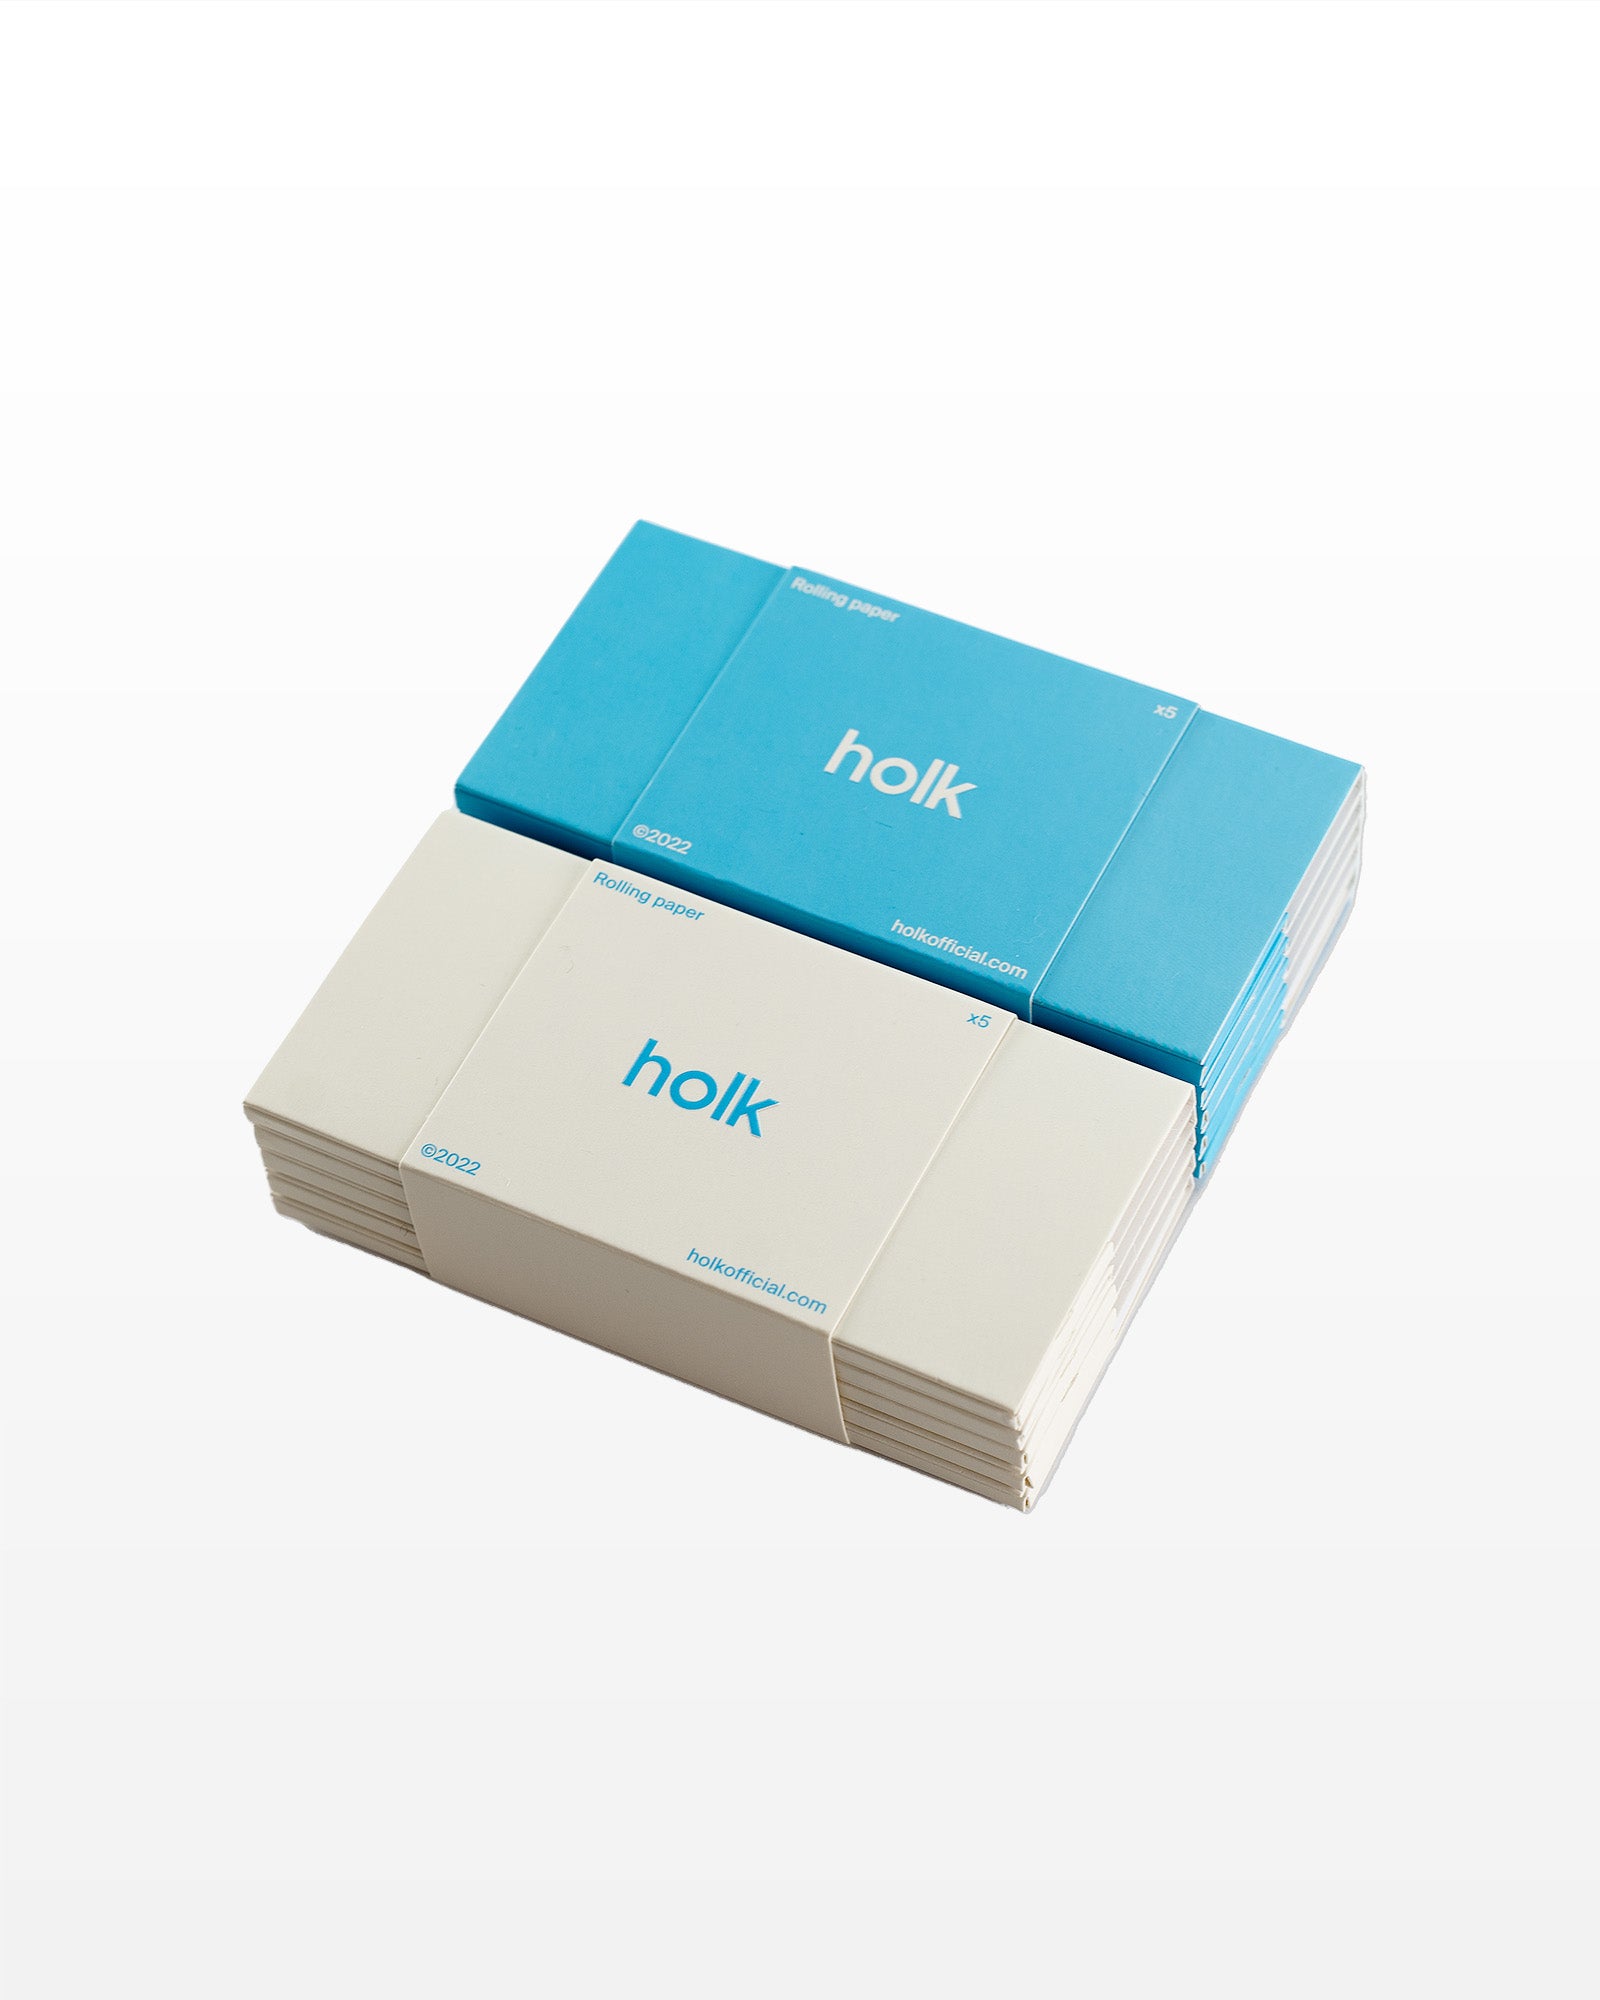 White and blue holk paper sets